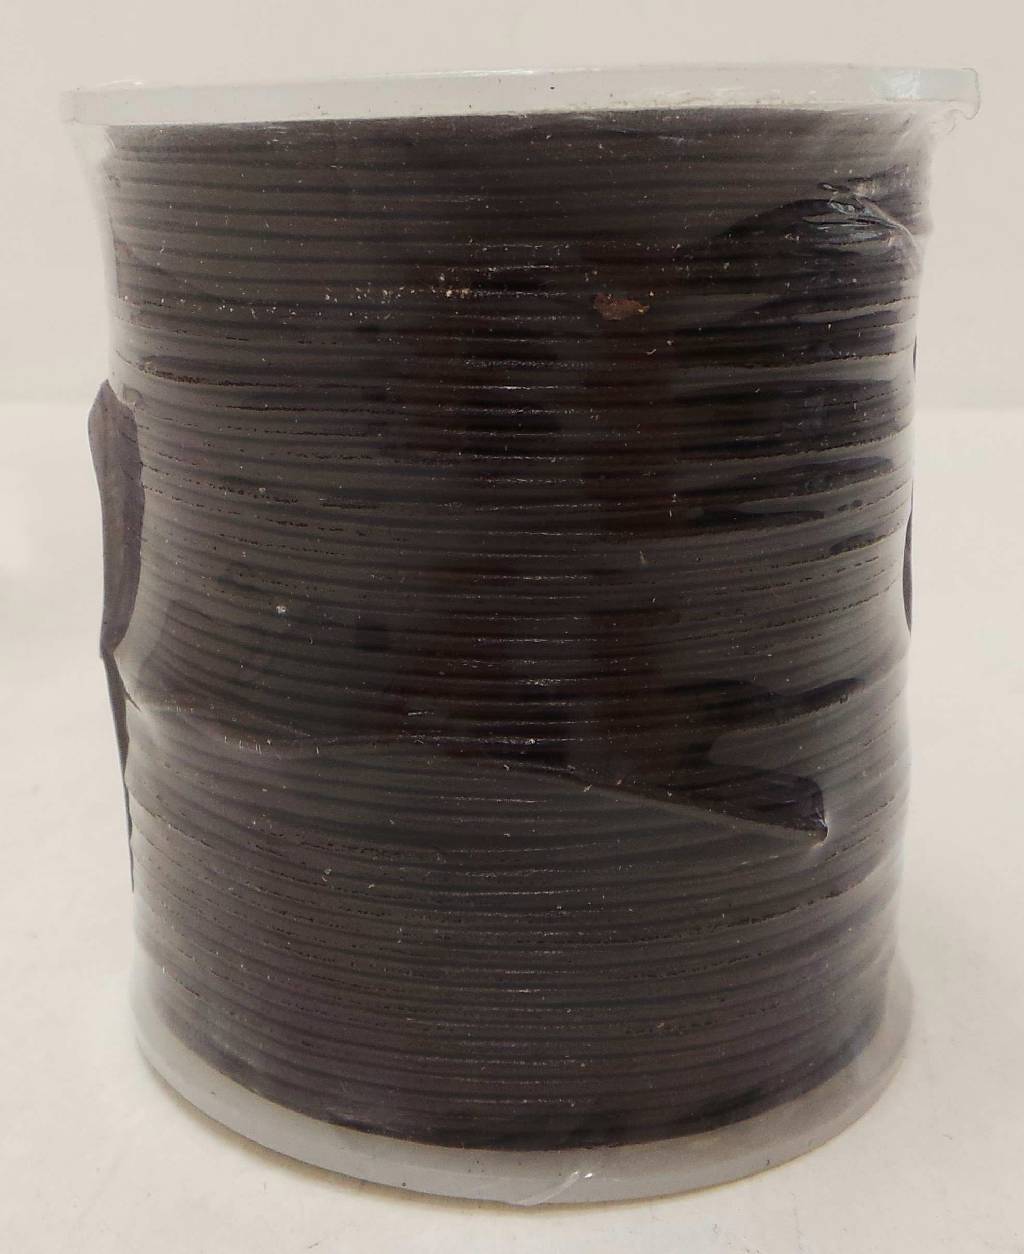 Joblot of 1100m of Brown Real Leather Round Cords 3 Shades 1mm Wide